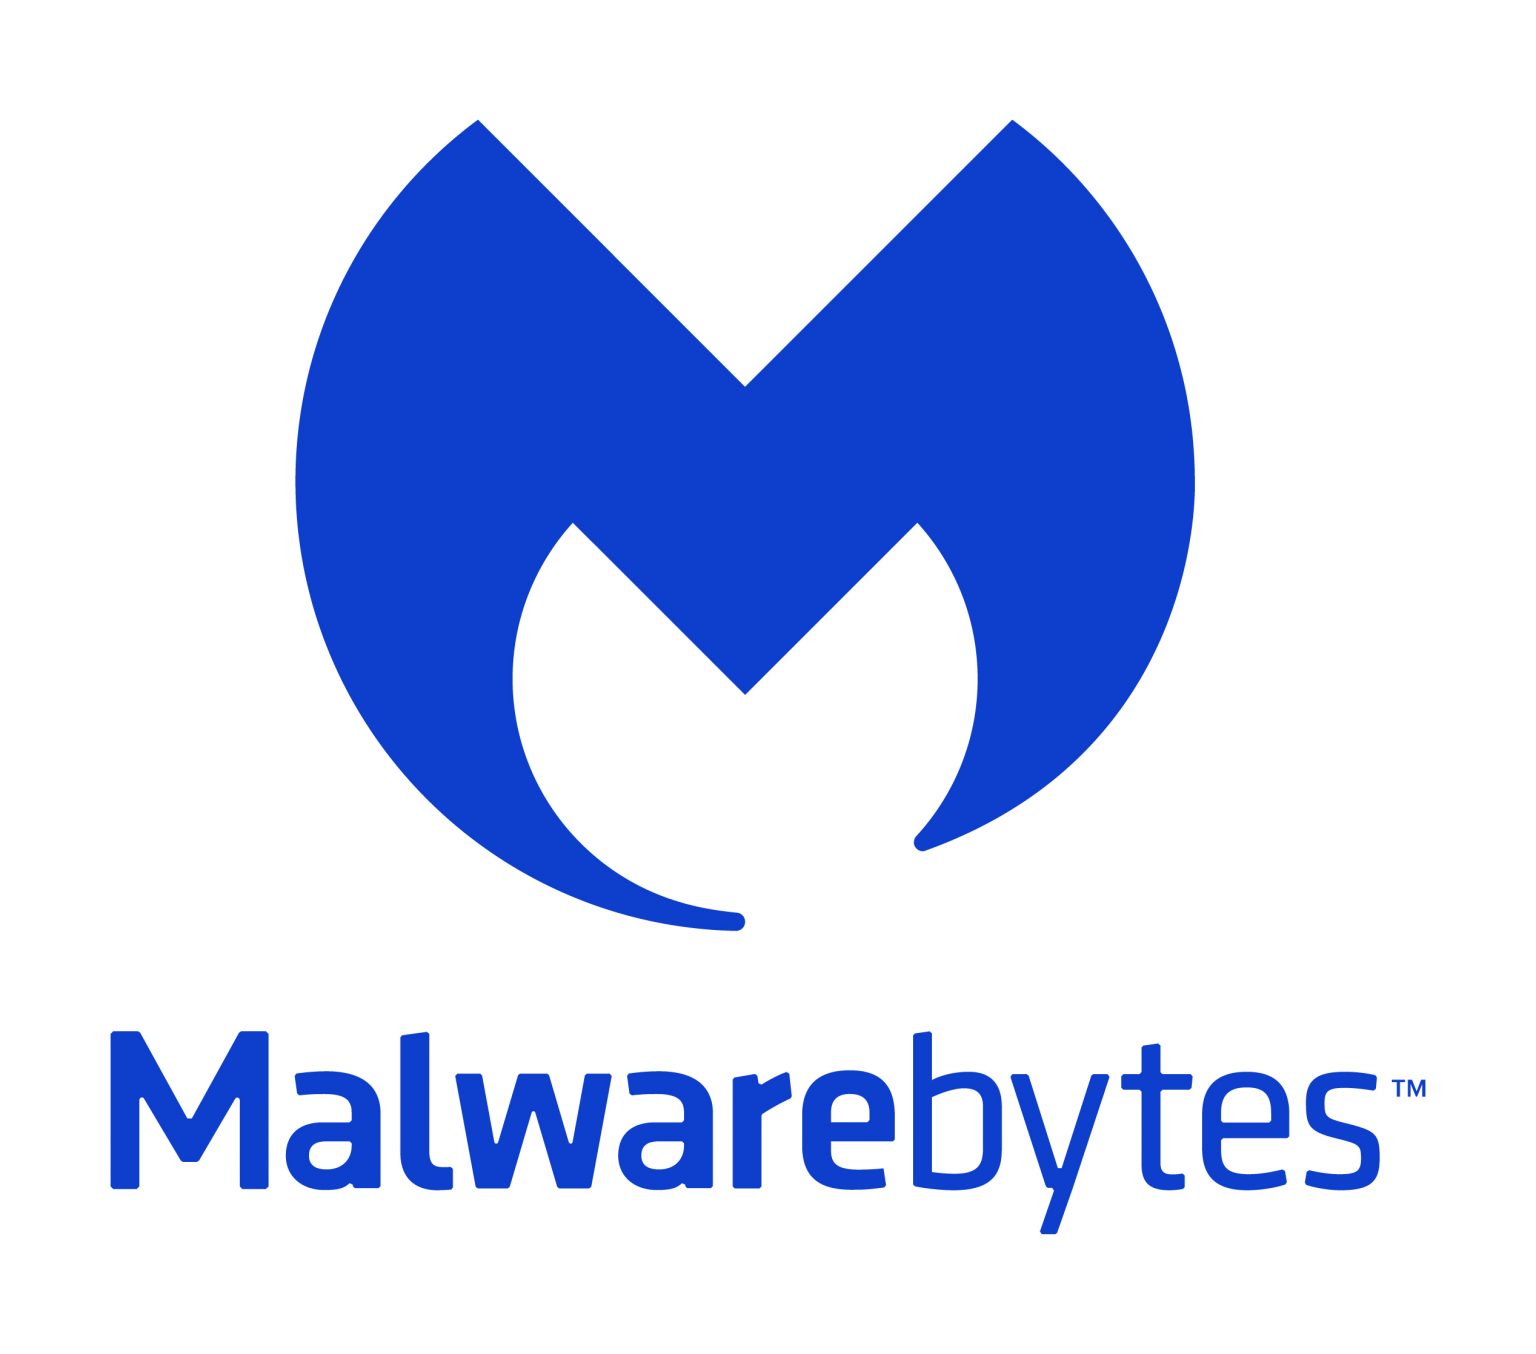 Malwarebytes raised $100M from PE firm Vector Capital for a minority stake, weeks after the company laid off 125 employees, or 14% of its workforce (Carly Page/TechCrunch)